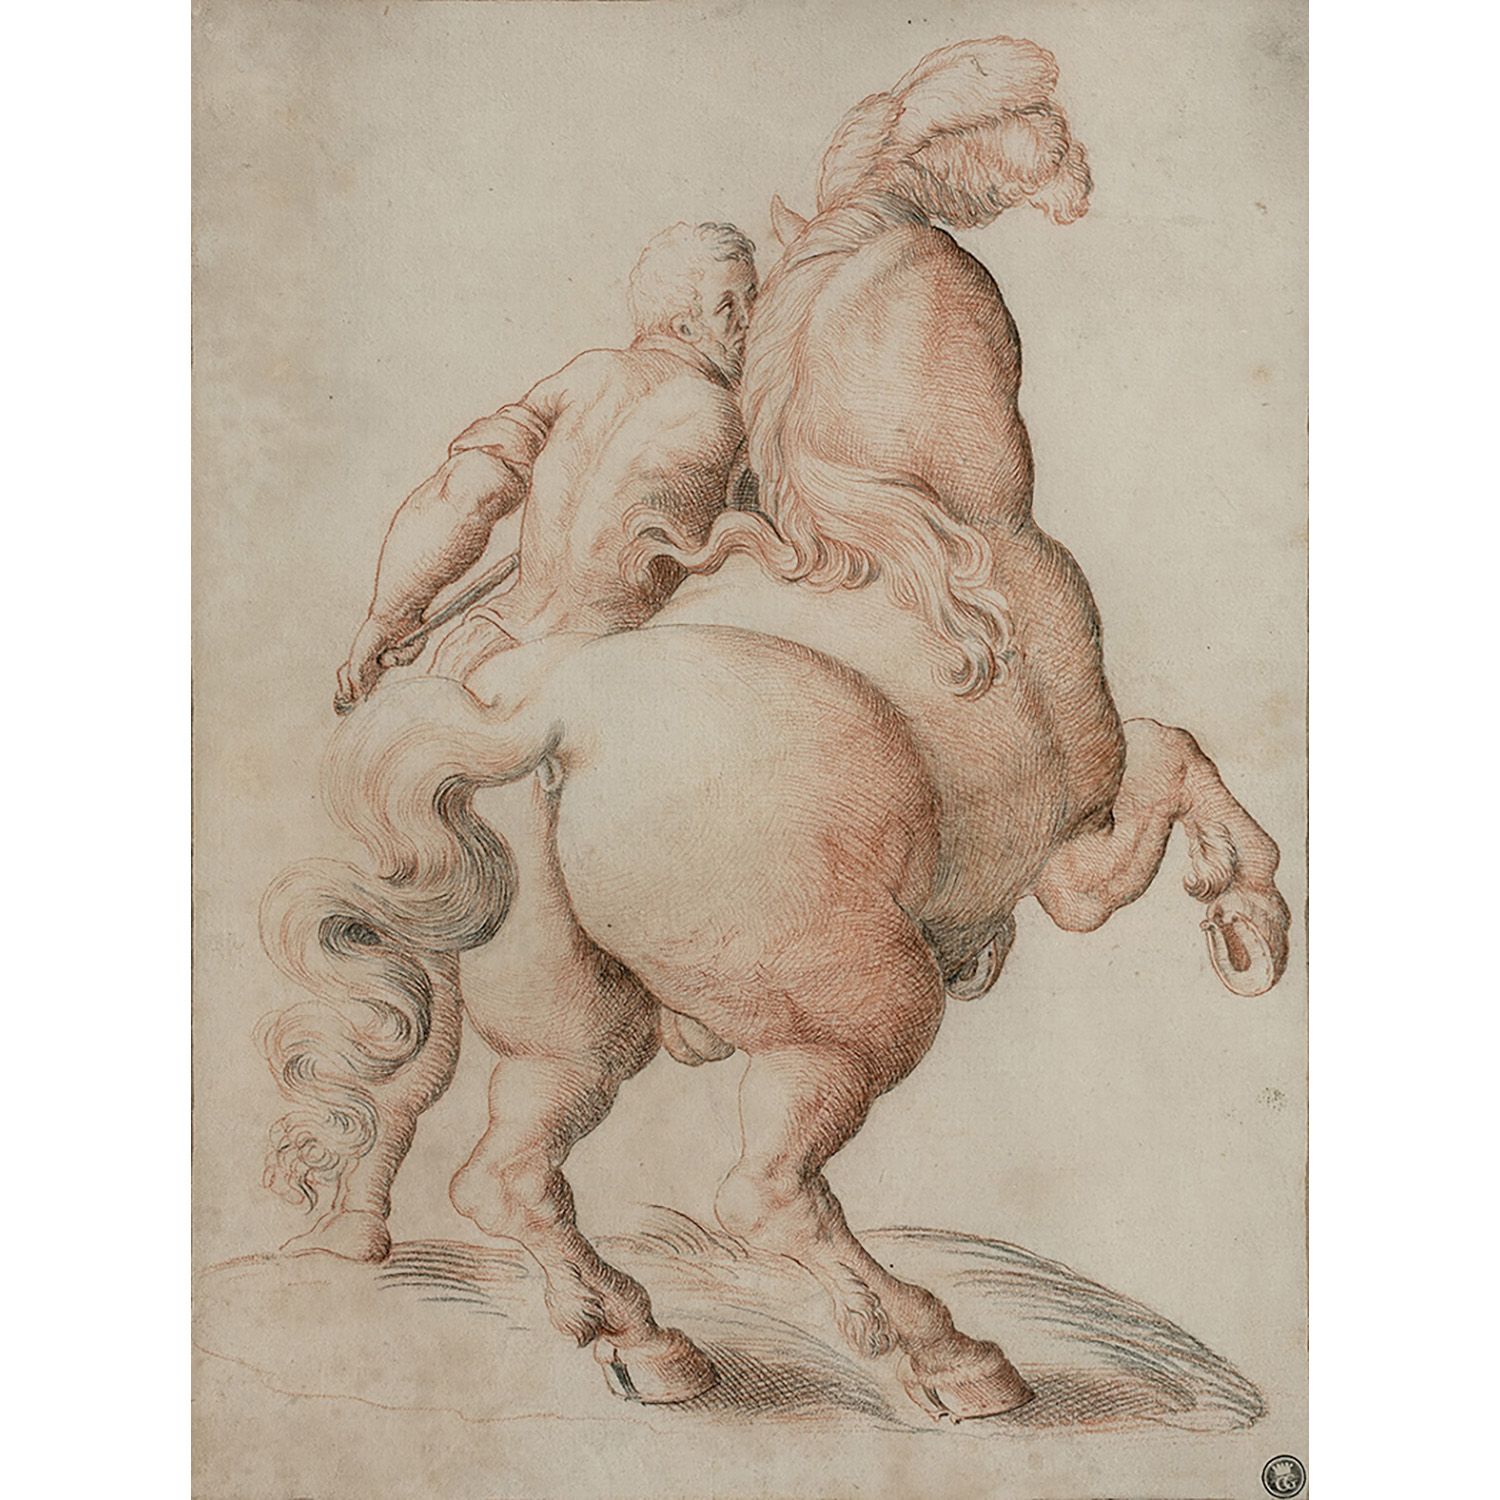 Null LATE 16th CENTURY ITALIAN SCHOOL
A man controlling a prancing horse, adorne&hellip;